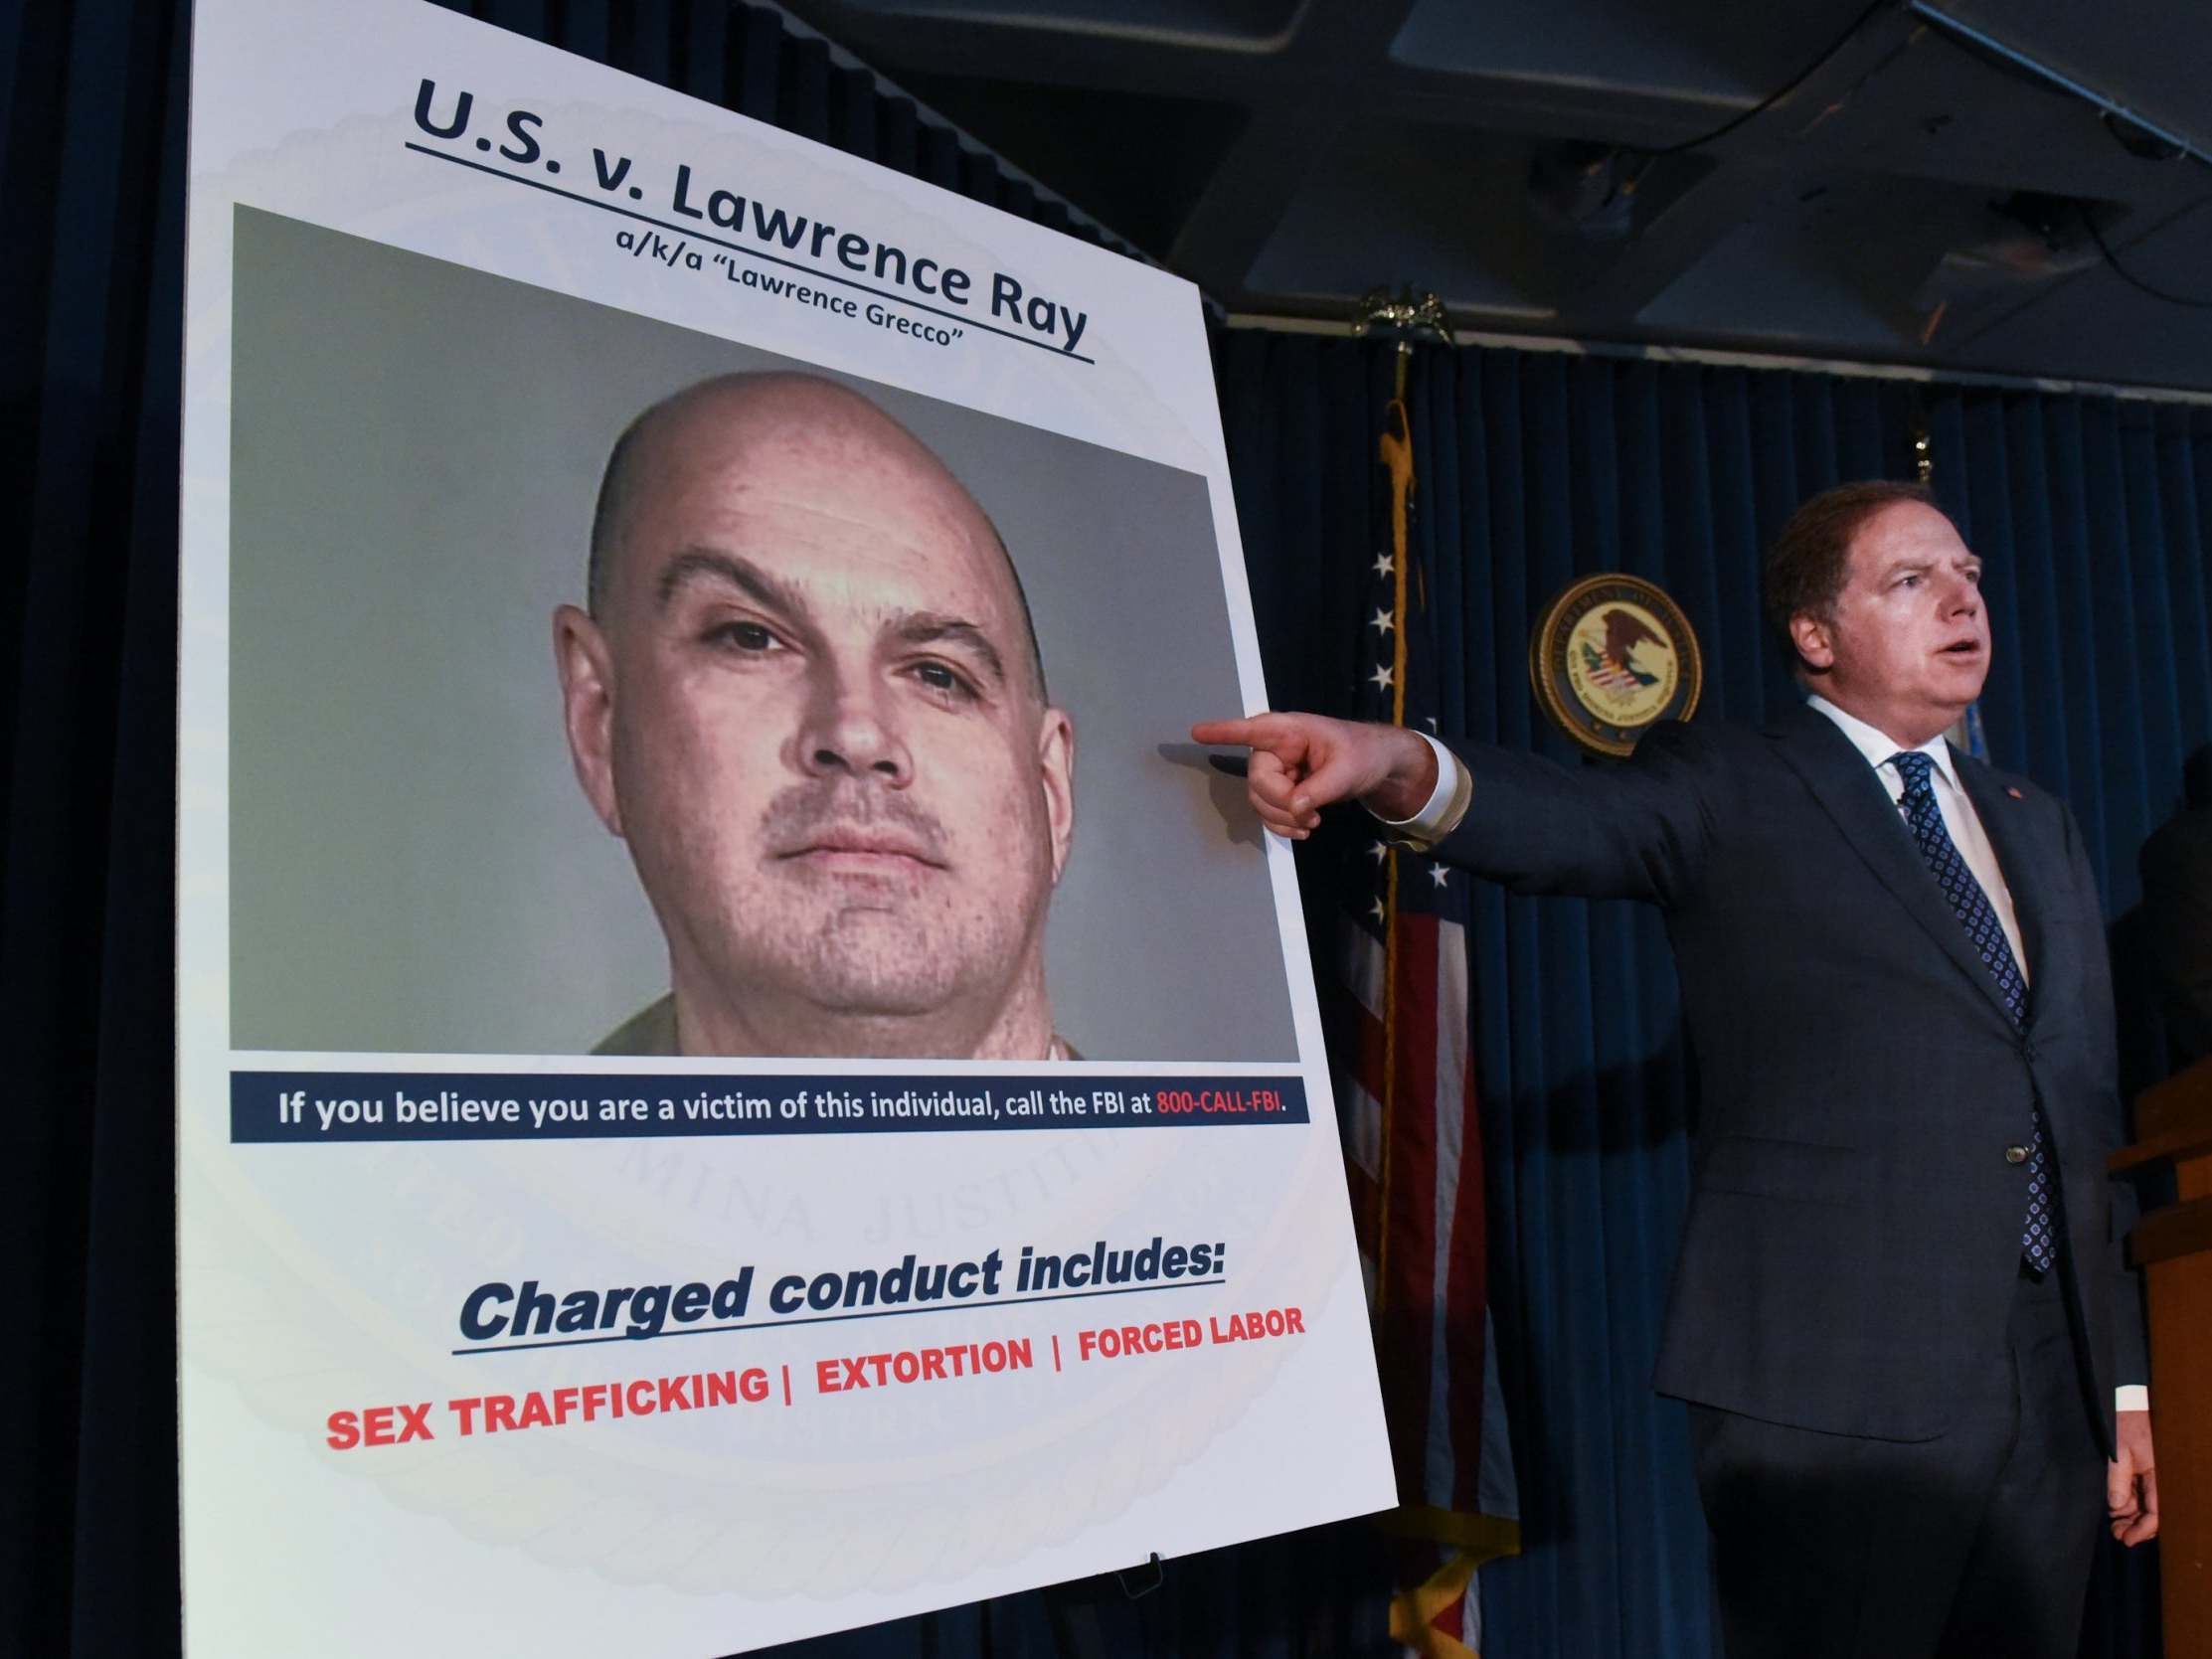 US attorney Geoffrey Berman said Lawrence Ray "exploited and abused young women and men emotionally, physically, and sexually"